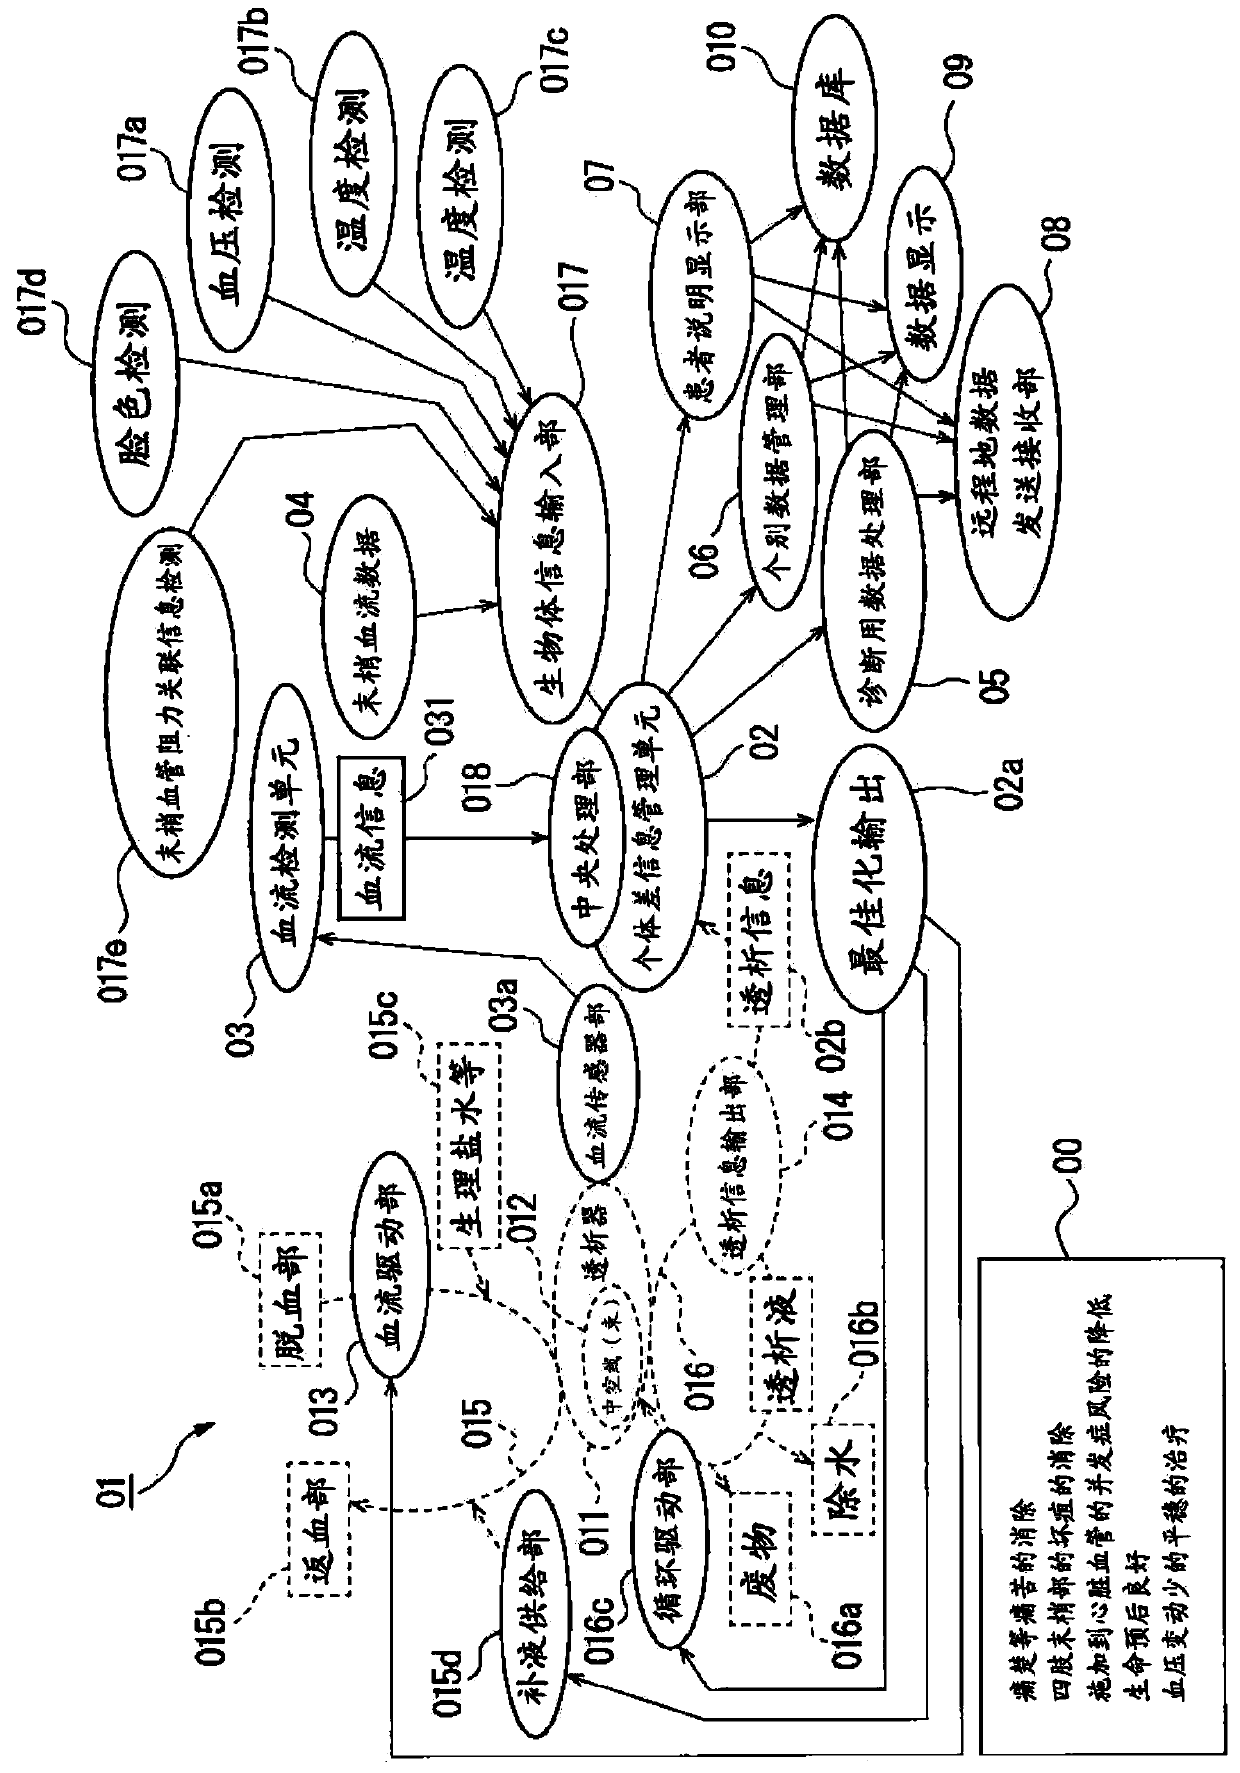 System for managing information relating to differences between individuals in dialysis treatment